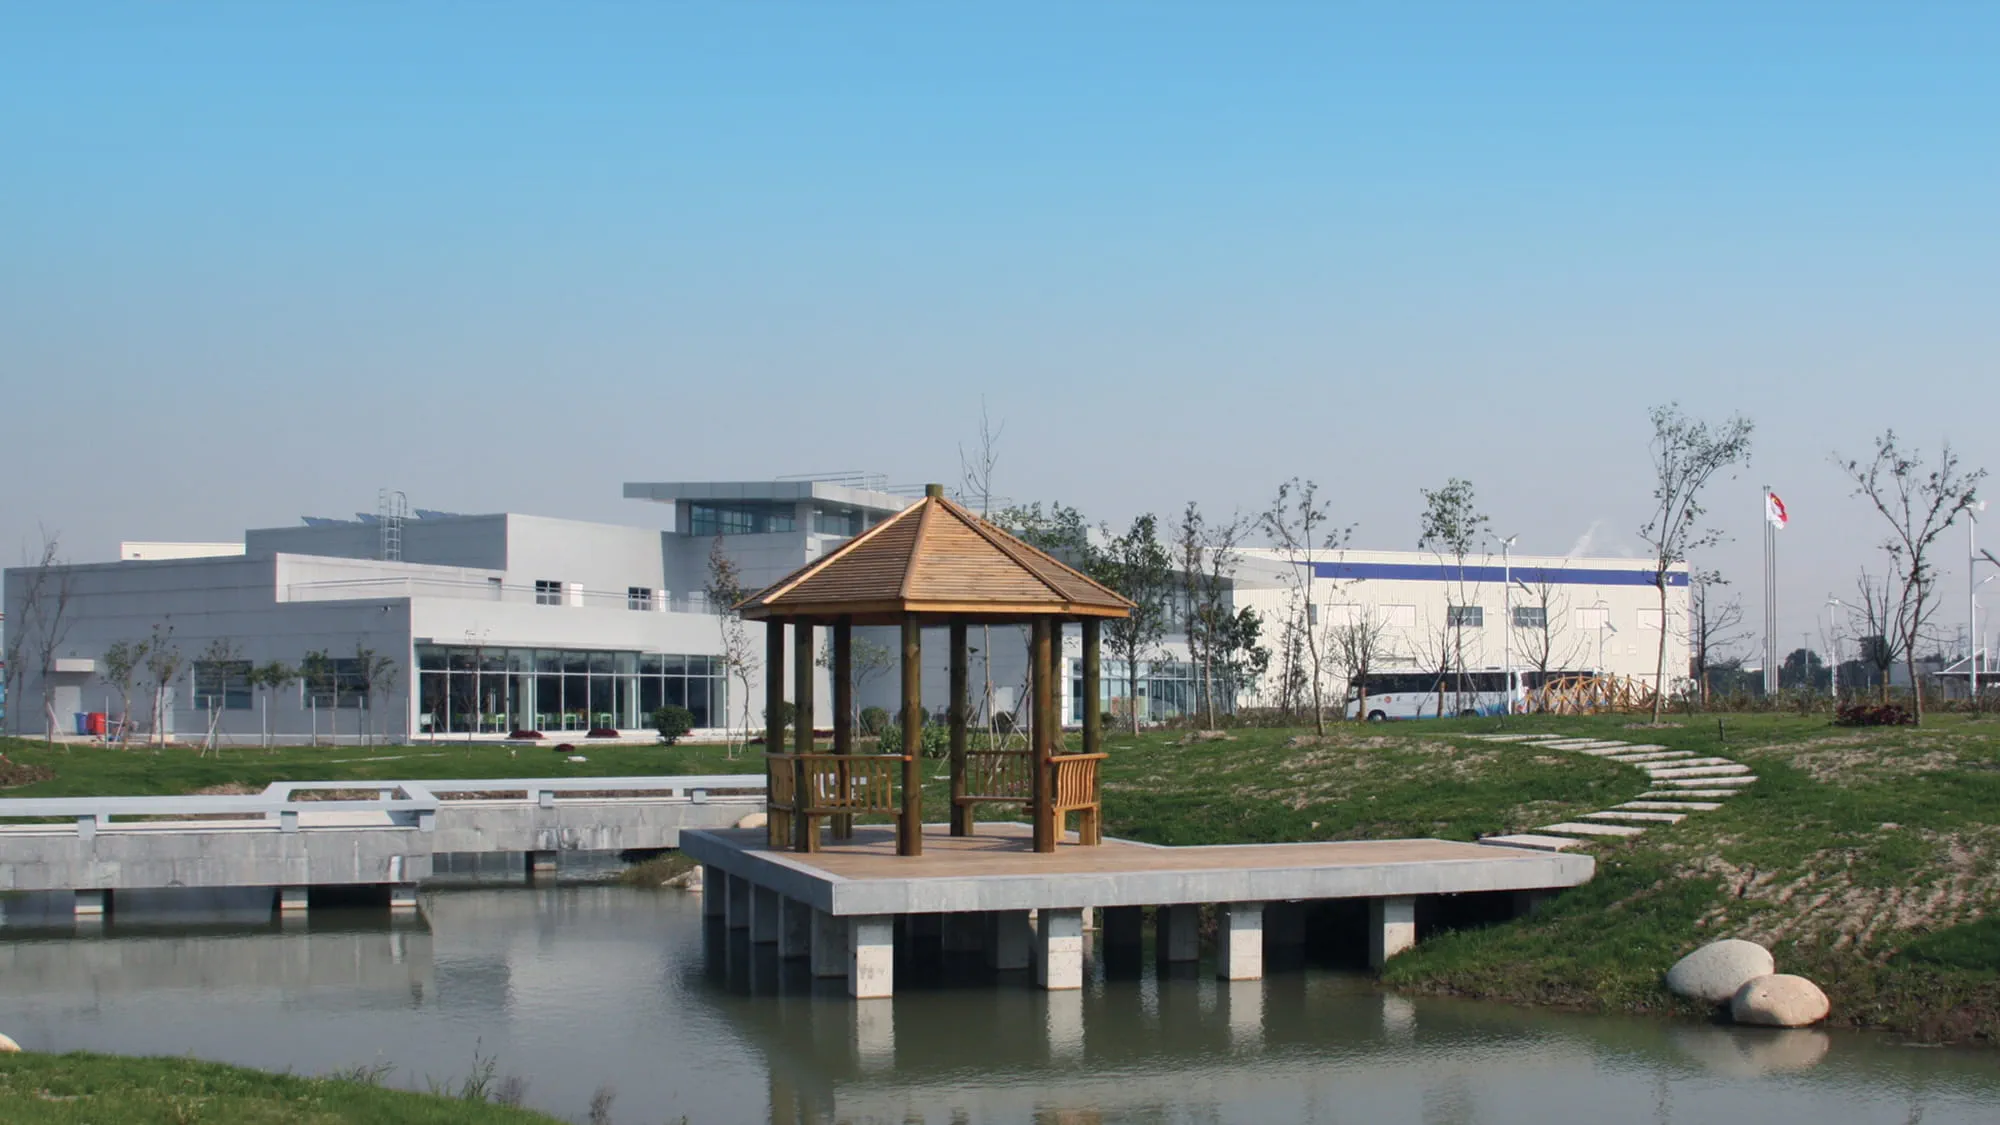 PnG taicang manufacturing campus